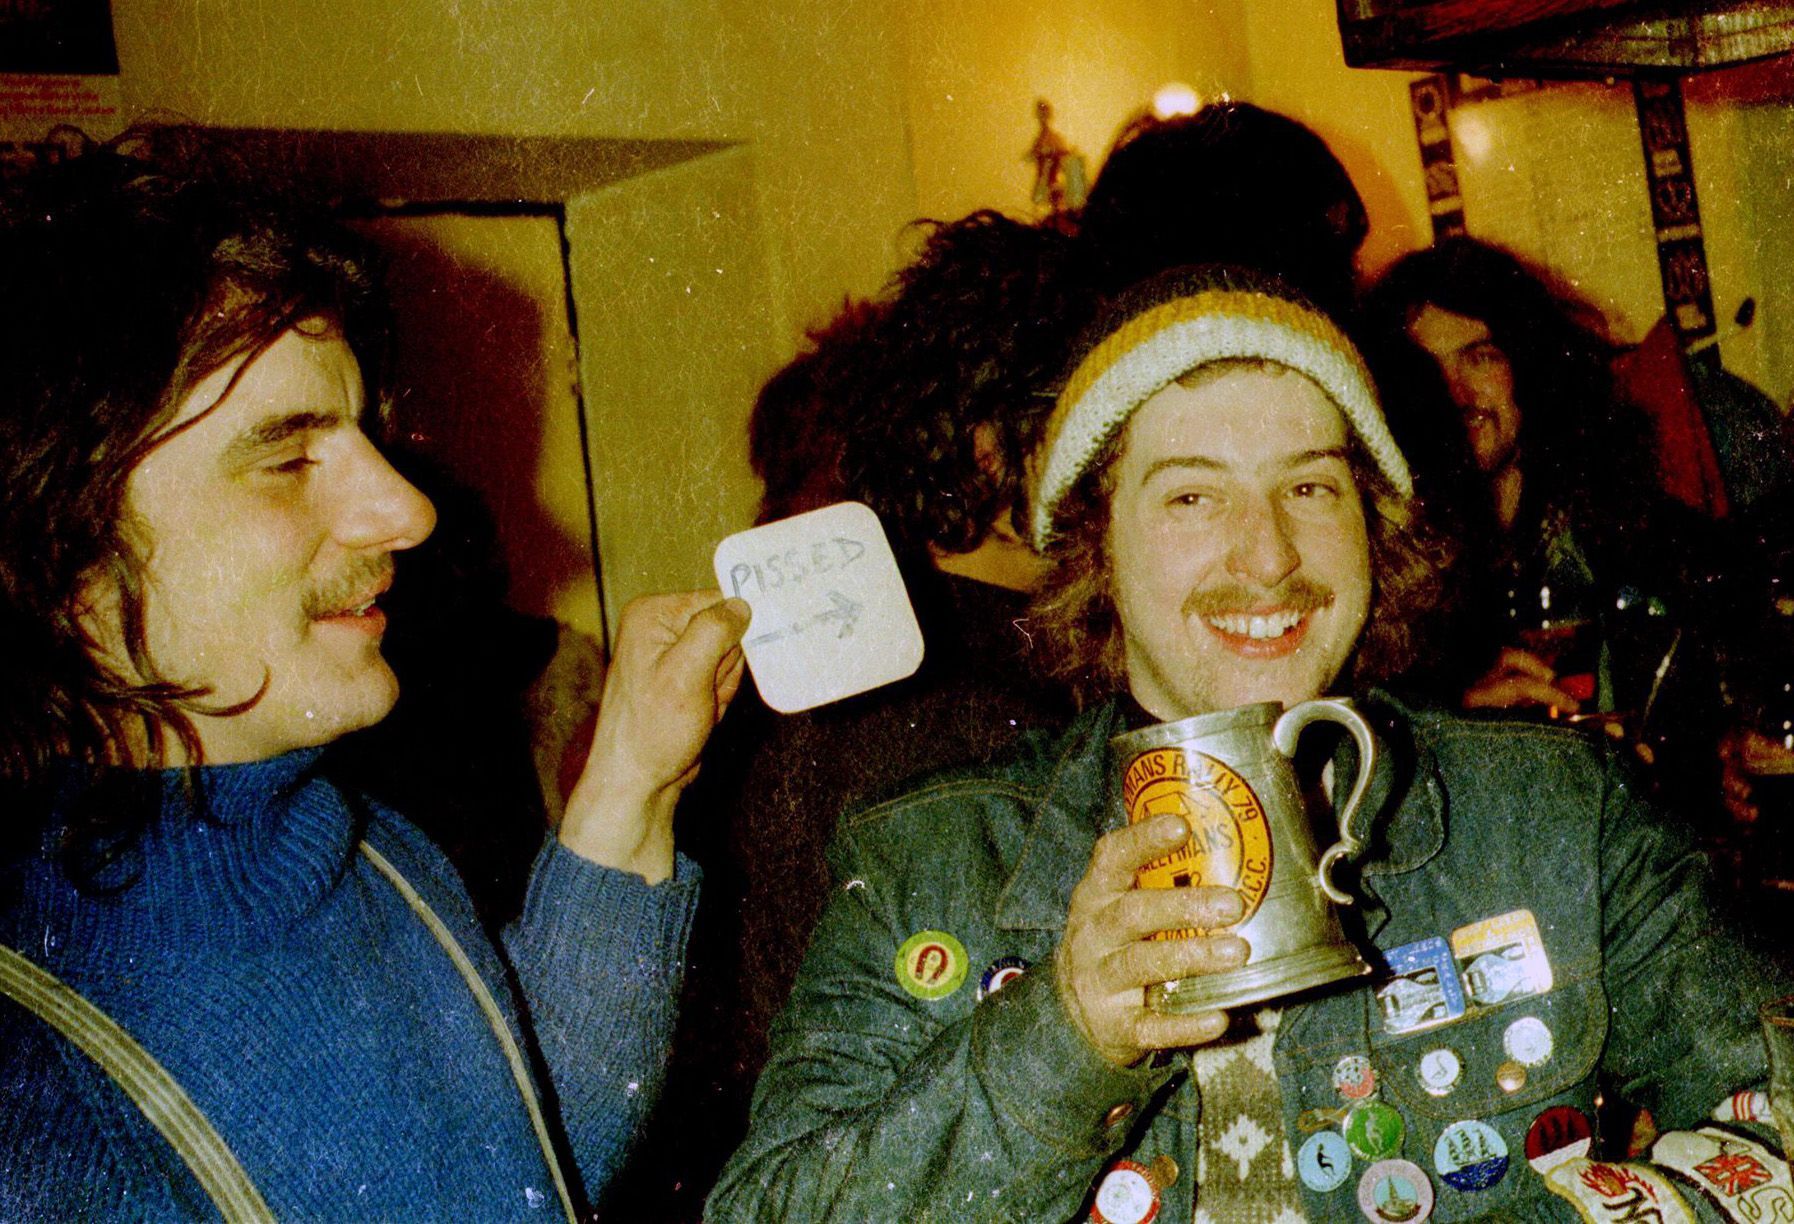 Two of the lads at the Ides of March Rally, February 1979